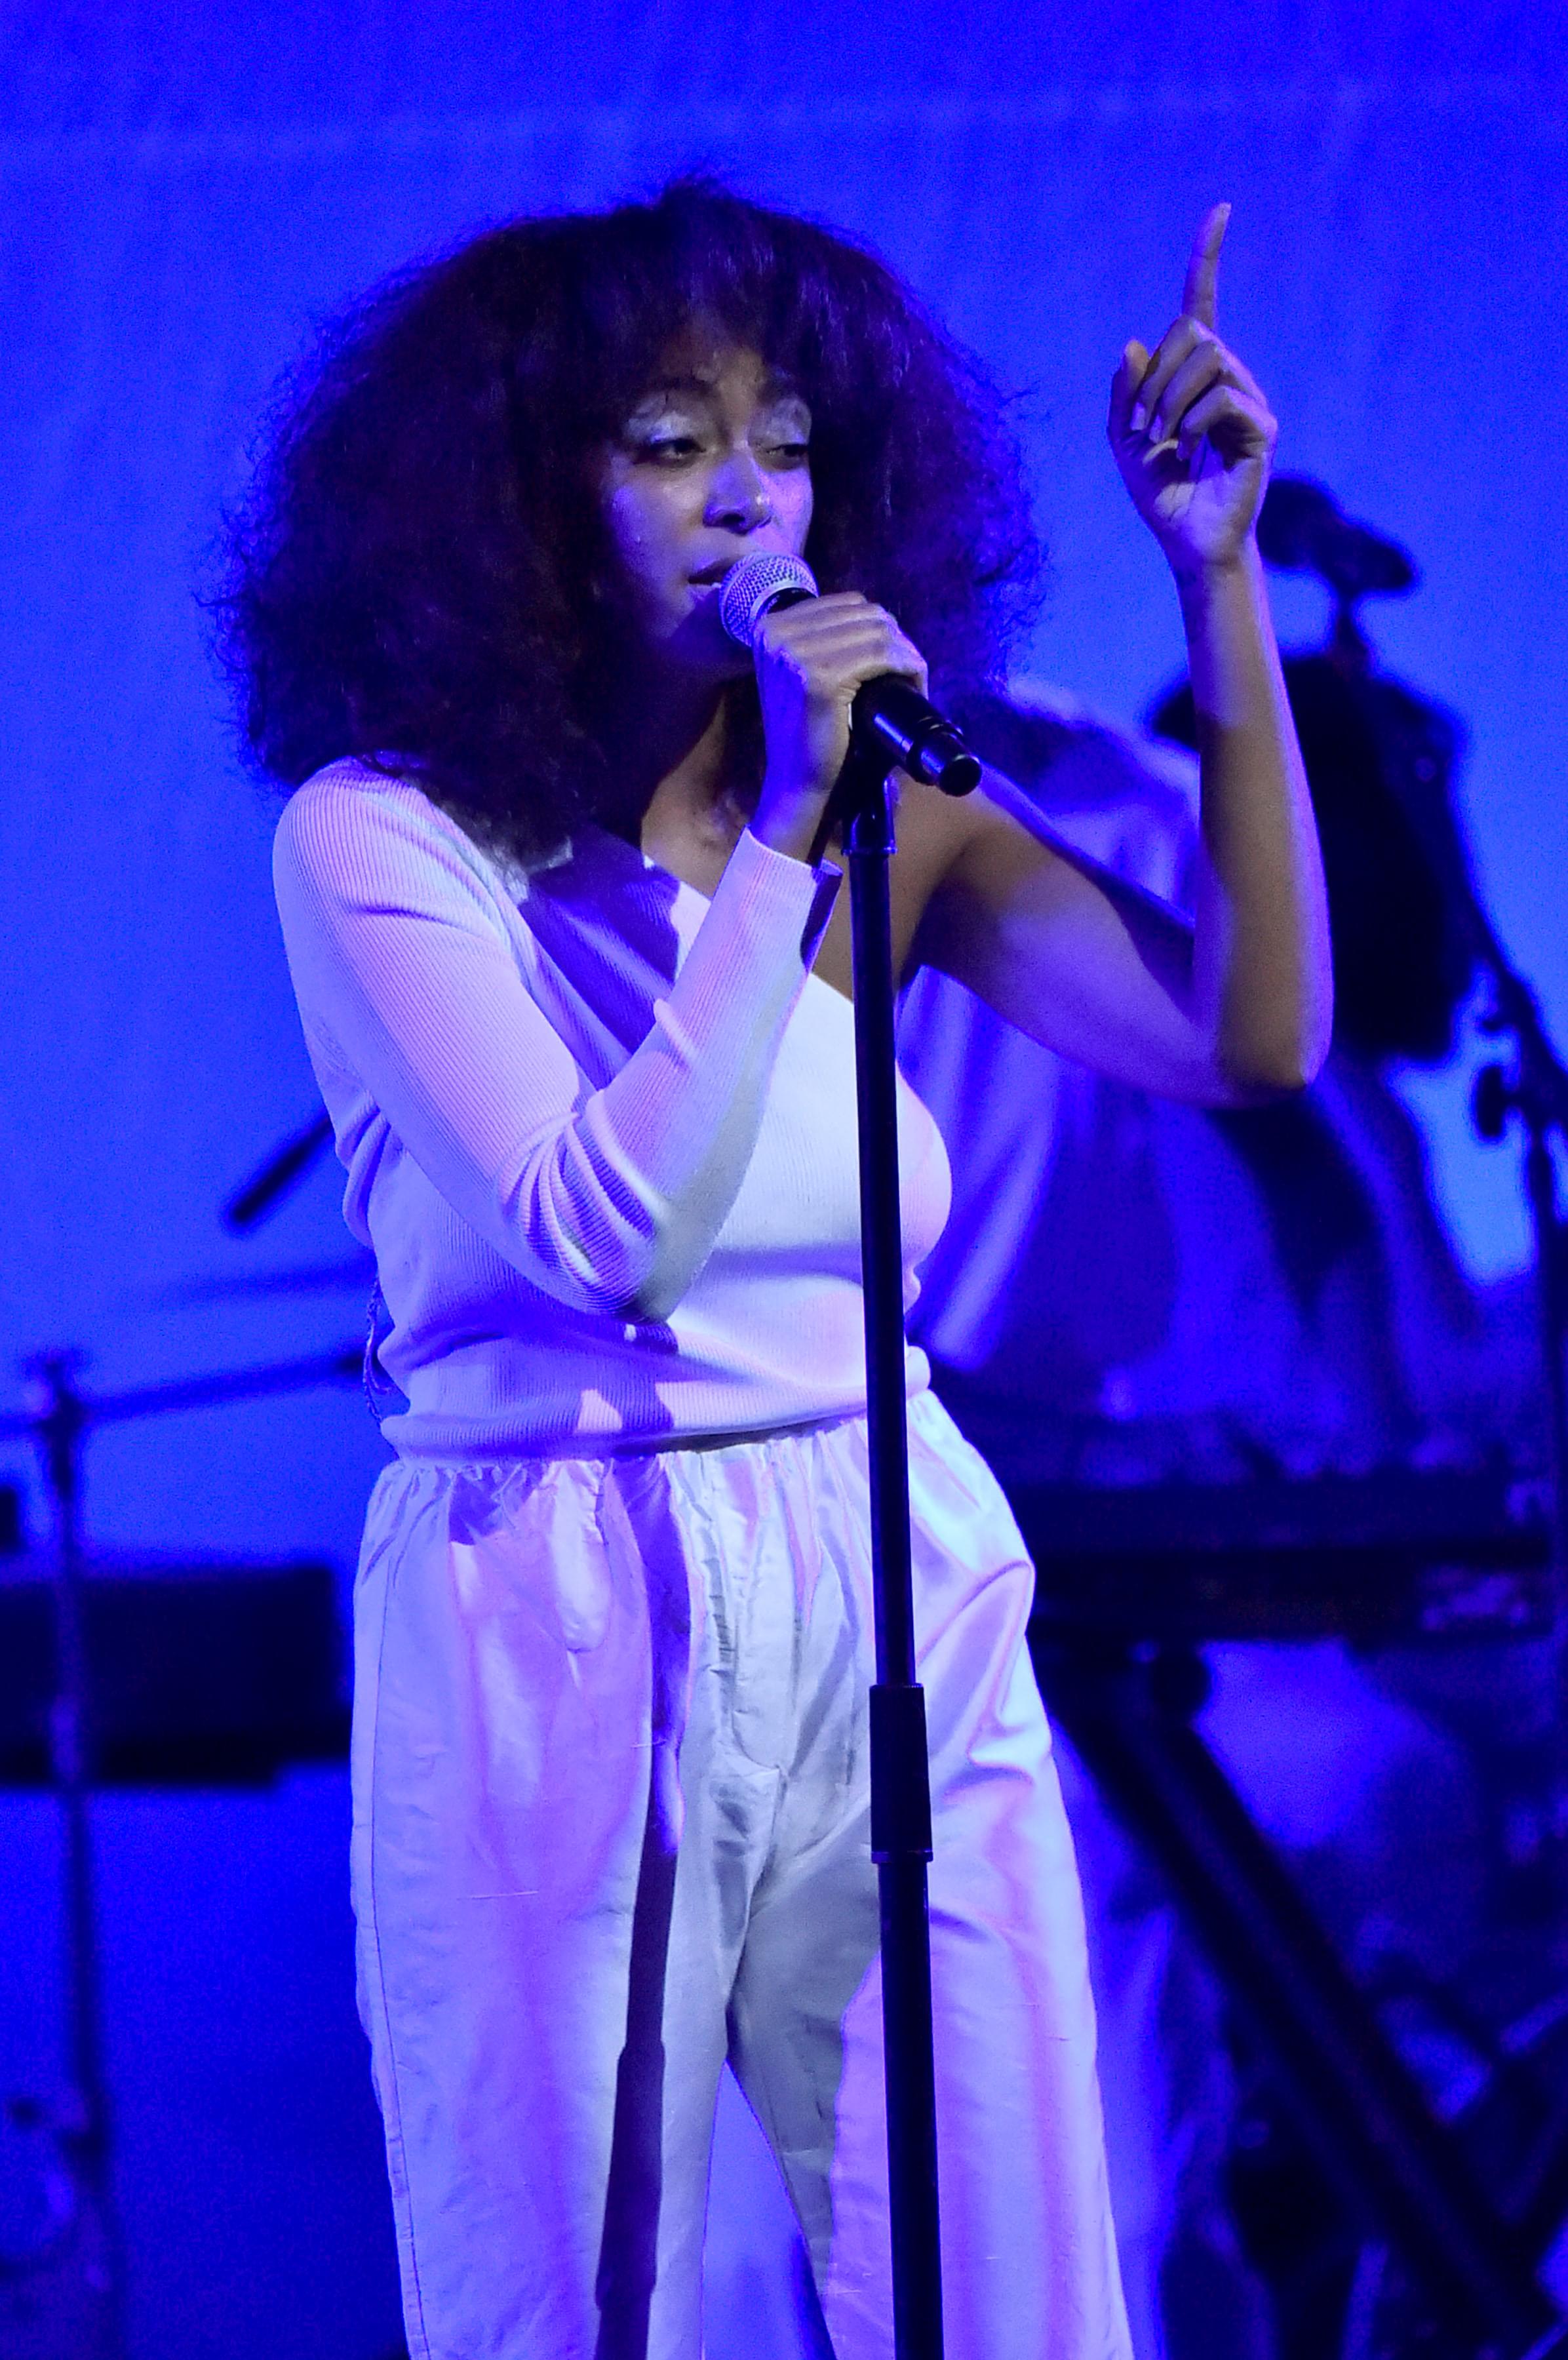 A Solange College Course Will Focus On Her Album “A Seat At The Table”